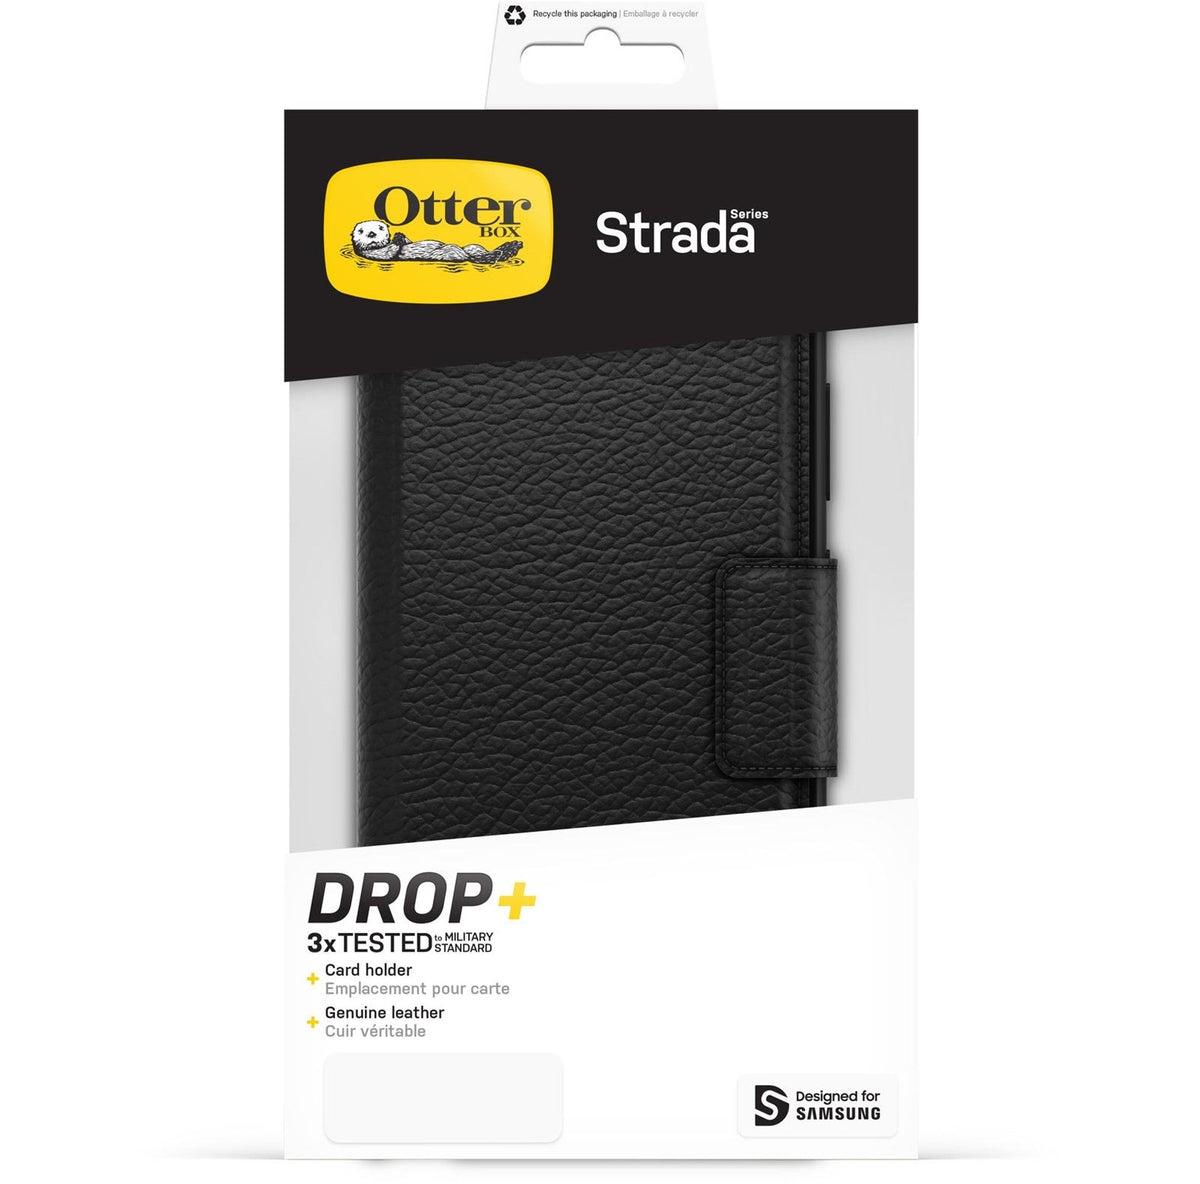 OtterBox Case for iPhone 13 Strada Series Case